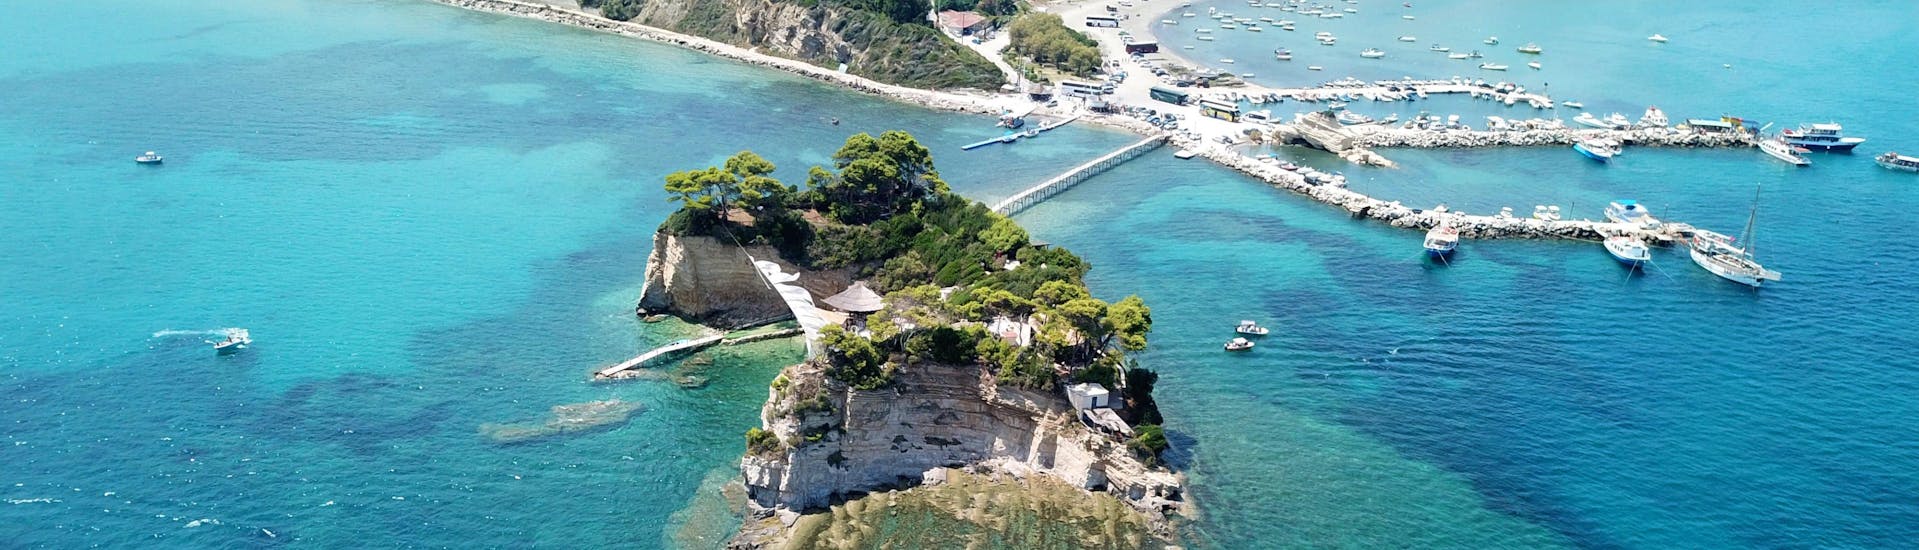 Picture of Laganas Bay, Zakynthos, and the wooden bridge connecting the Island.